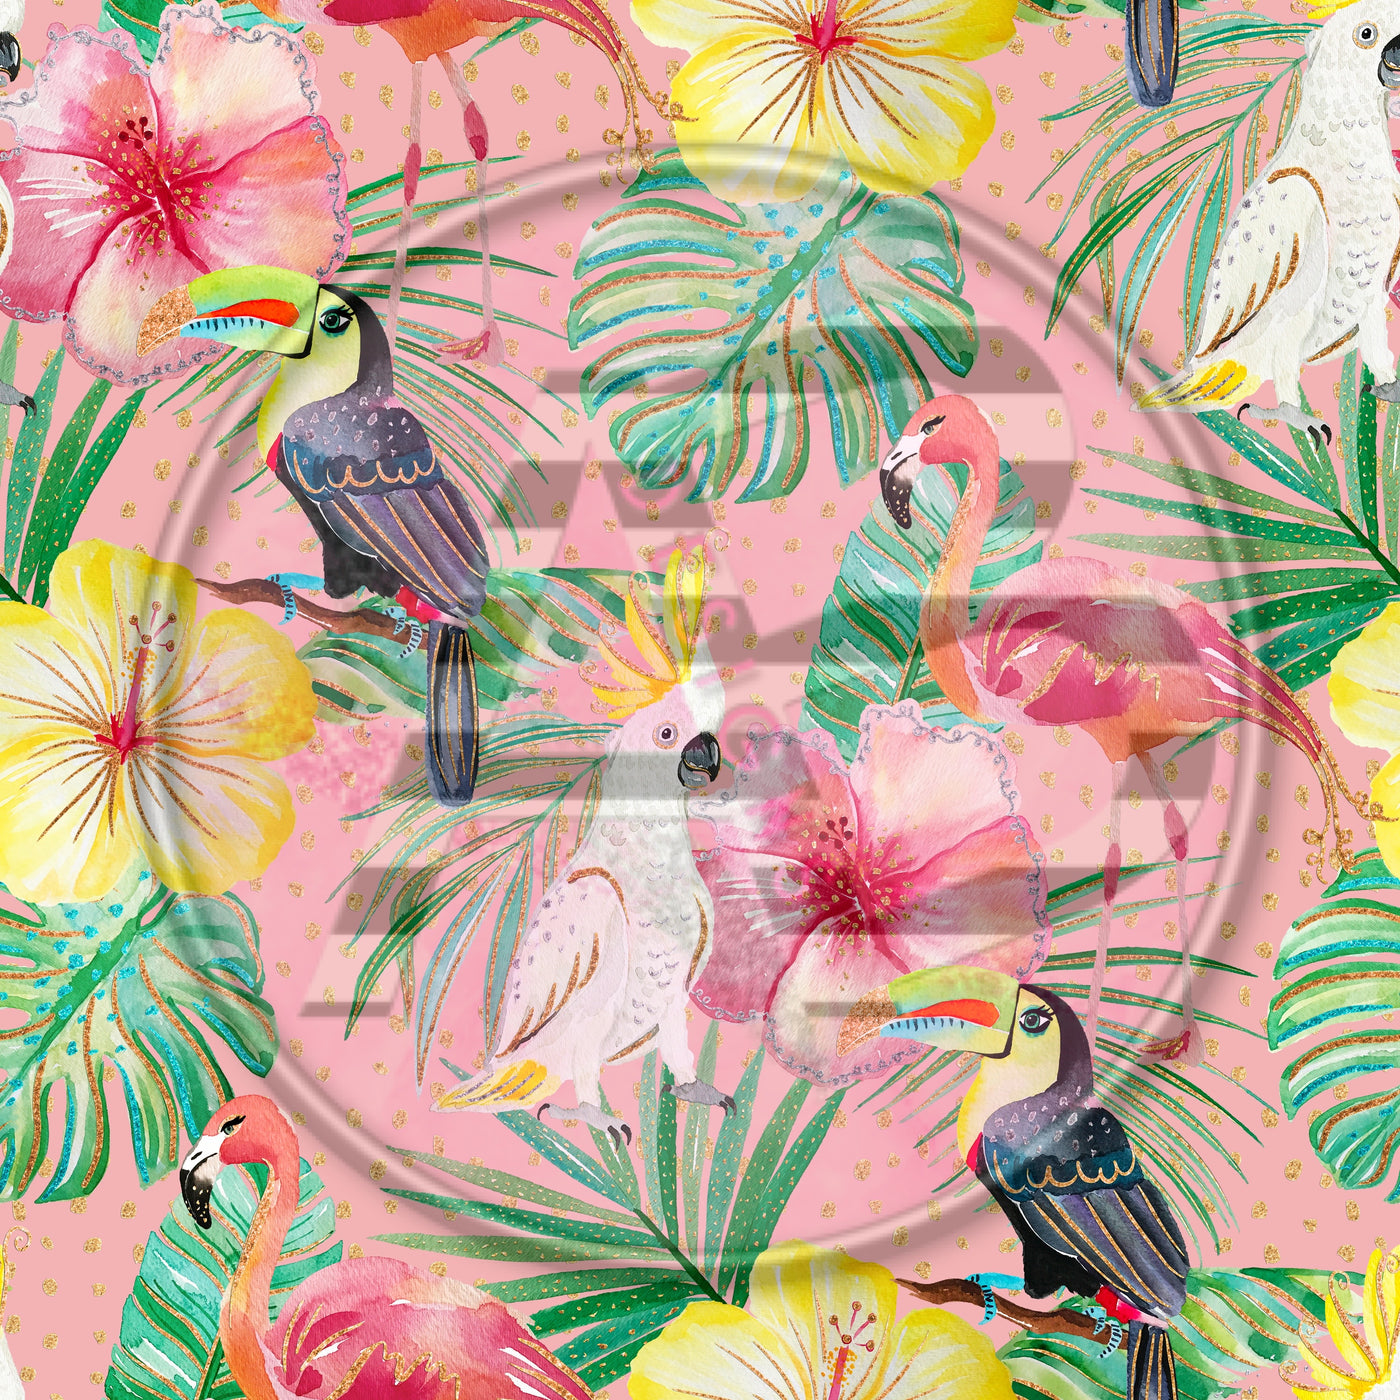 Adhesive Patterned Vinyl - Tropical 713